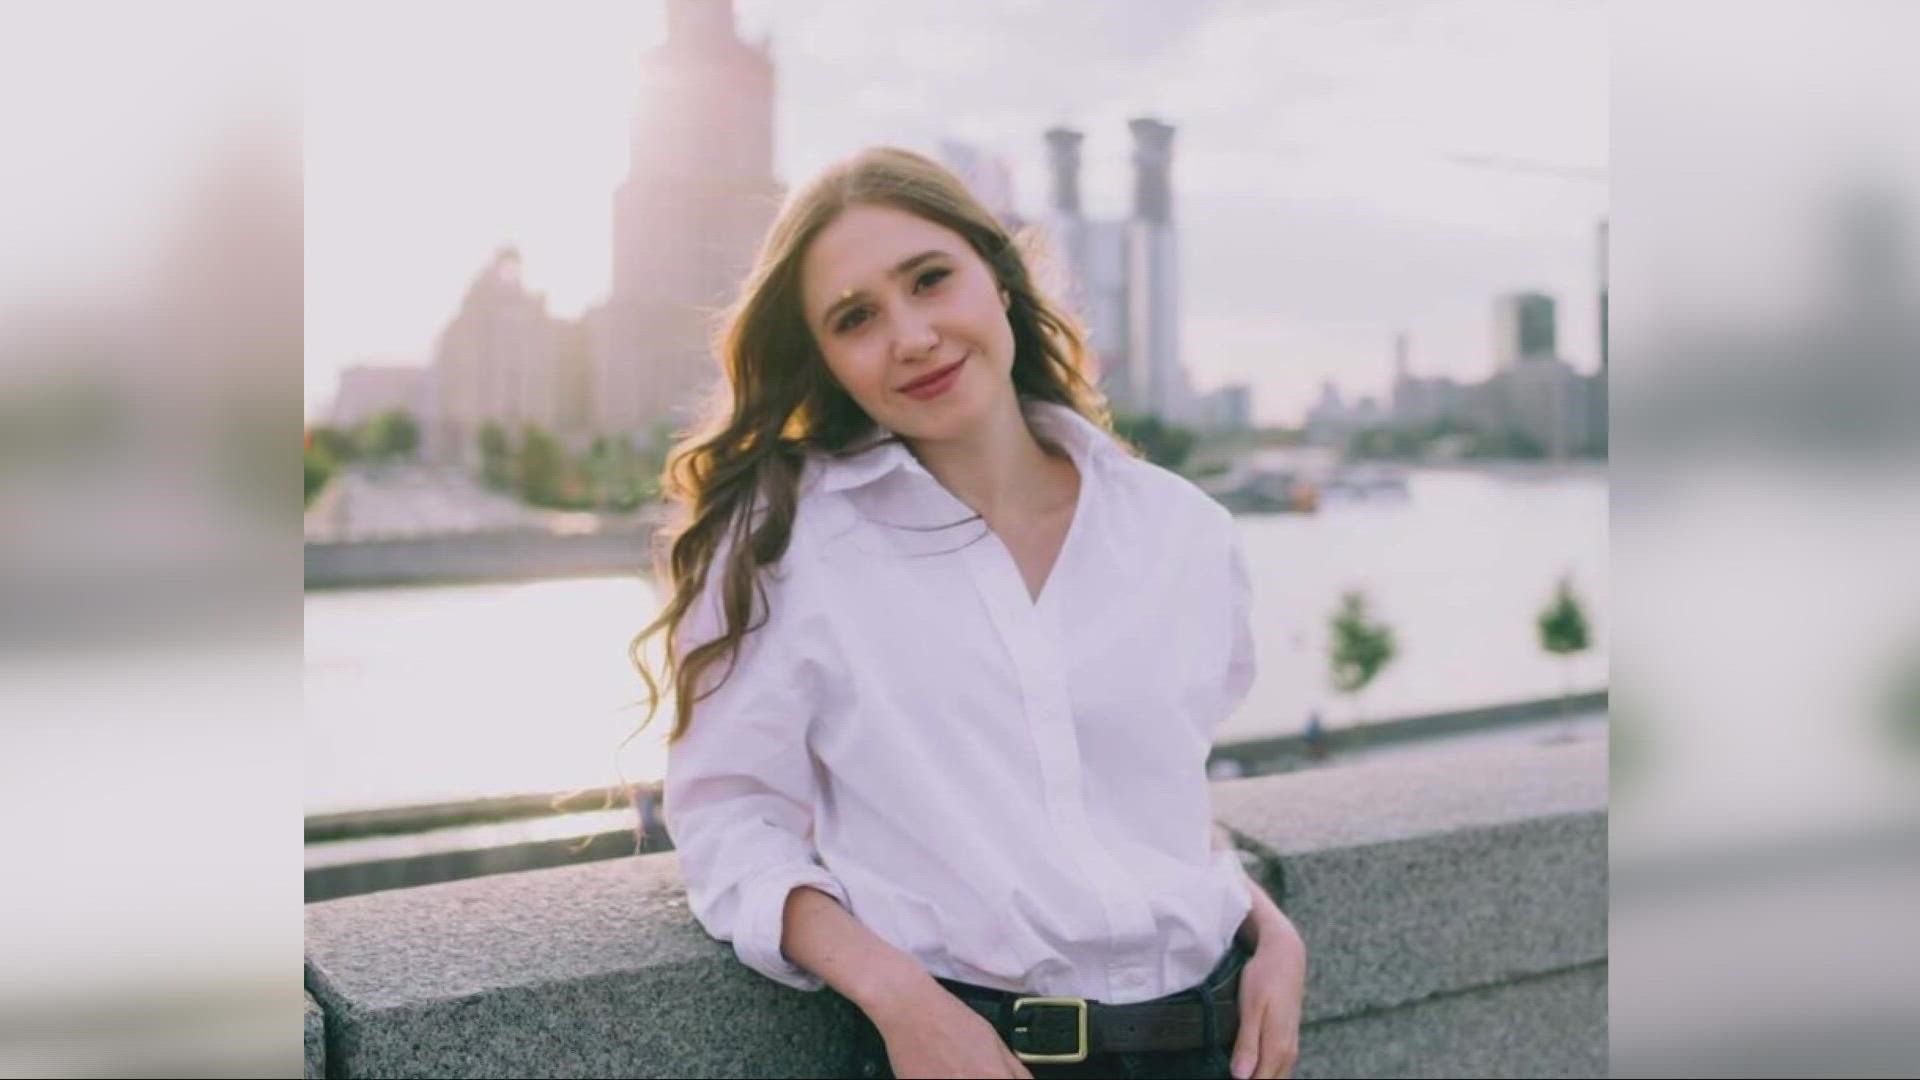 Uliana Pavlova spoke to us from an undisclosed location because of her country's strict penalties for honestly reporting about what's happening.